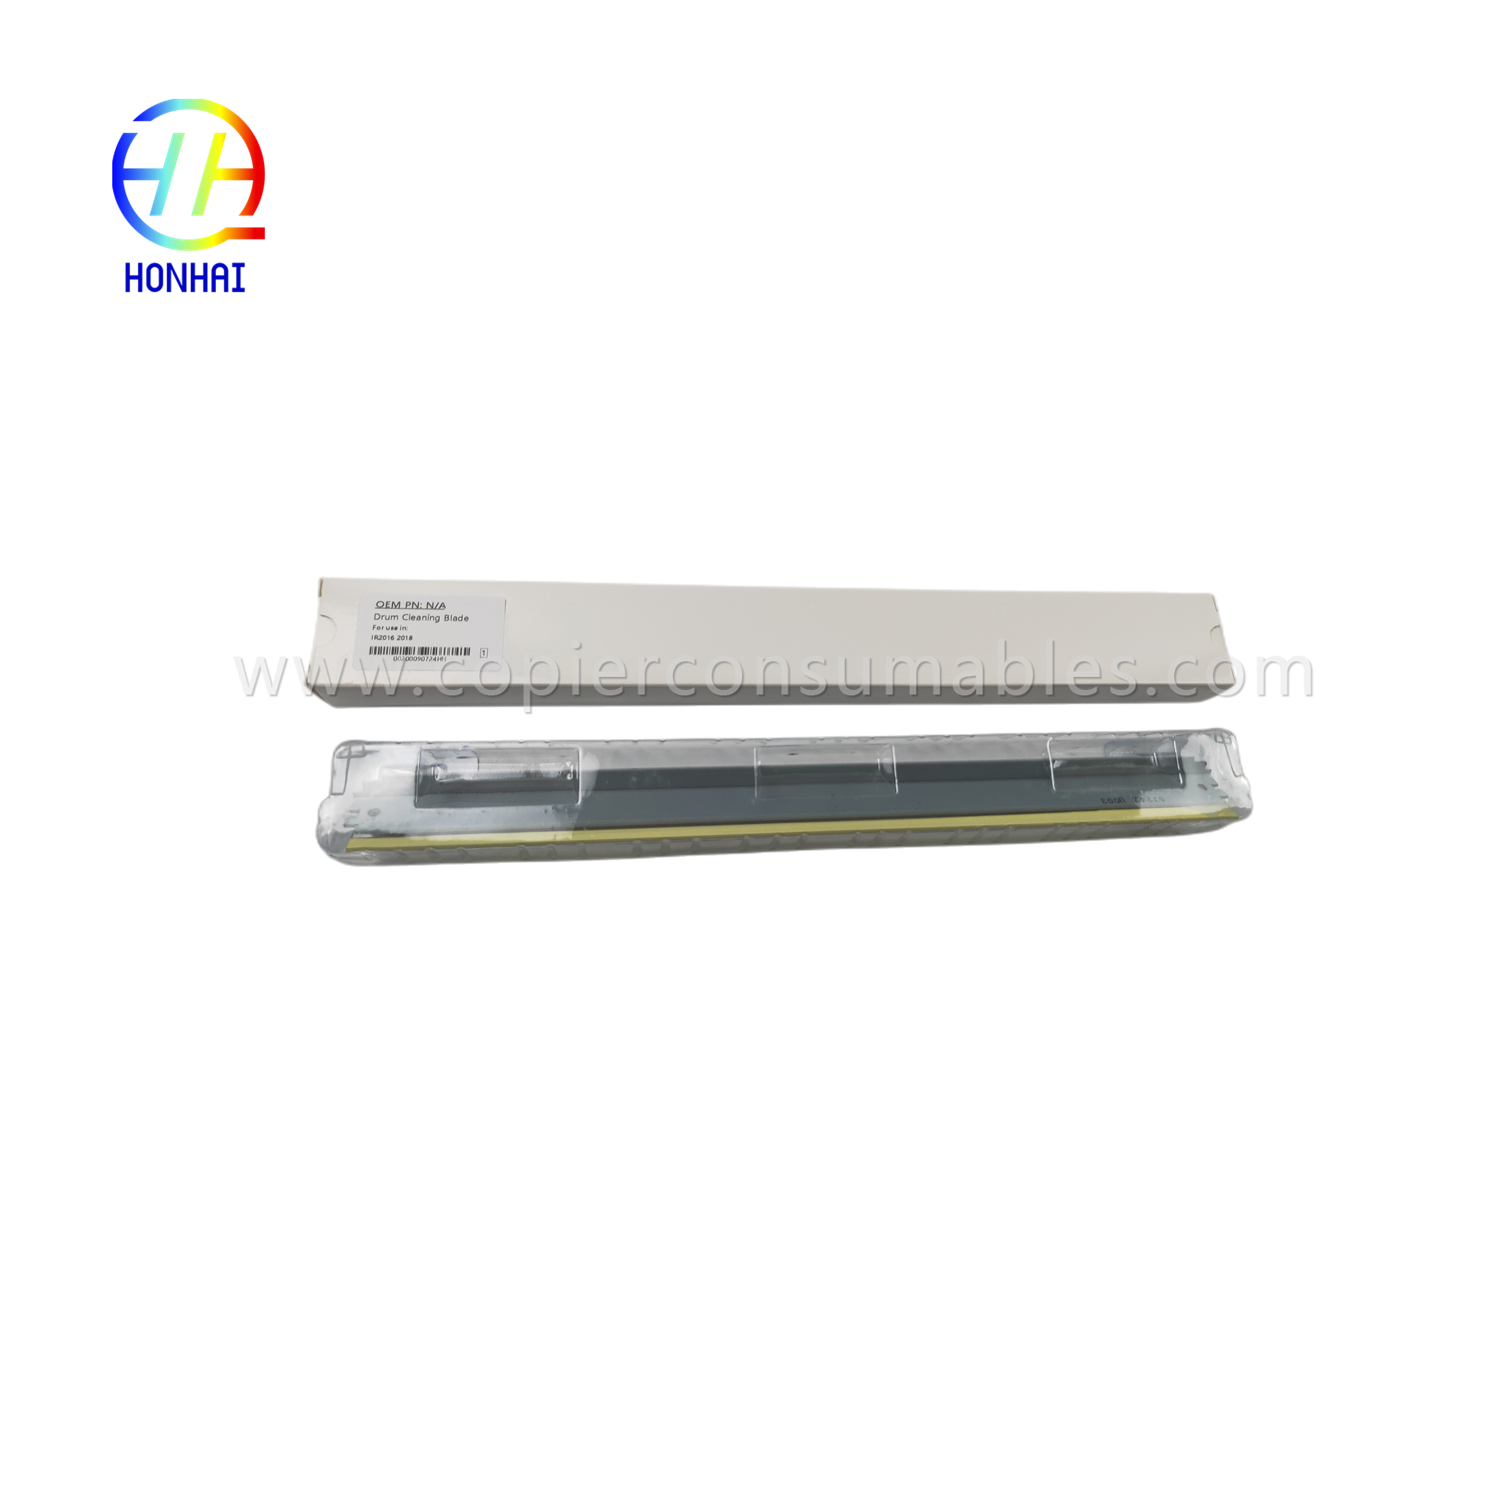 https://www.copierconsumables.com/drum-cleaning-blade-for-canon-ir1600-1610-2000-2016-2020-2320-product/